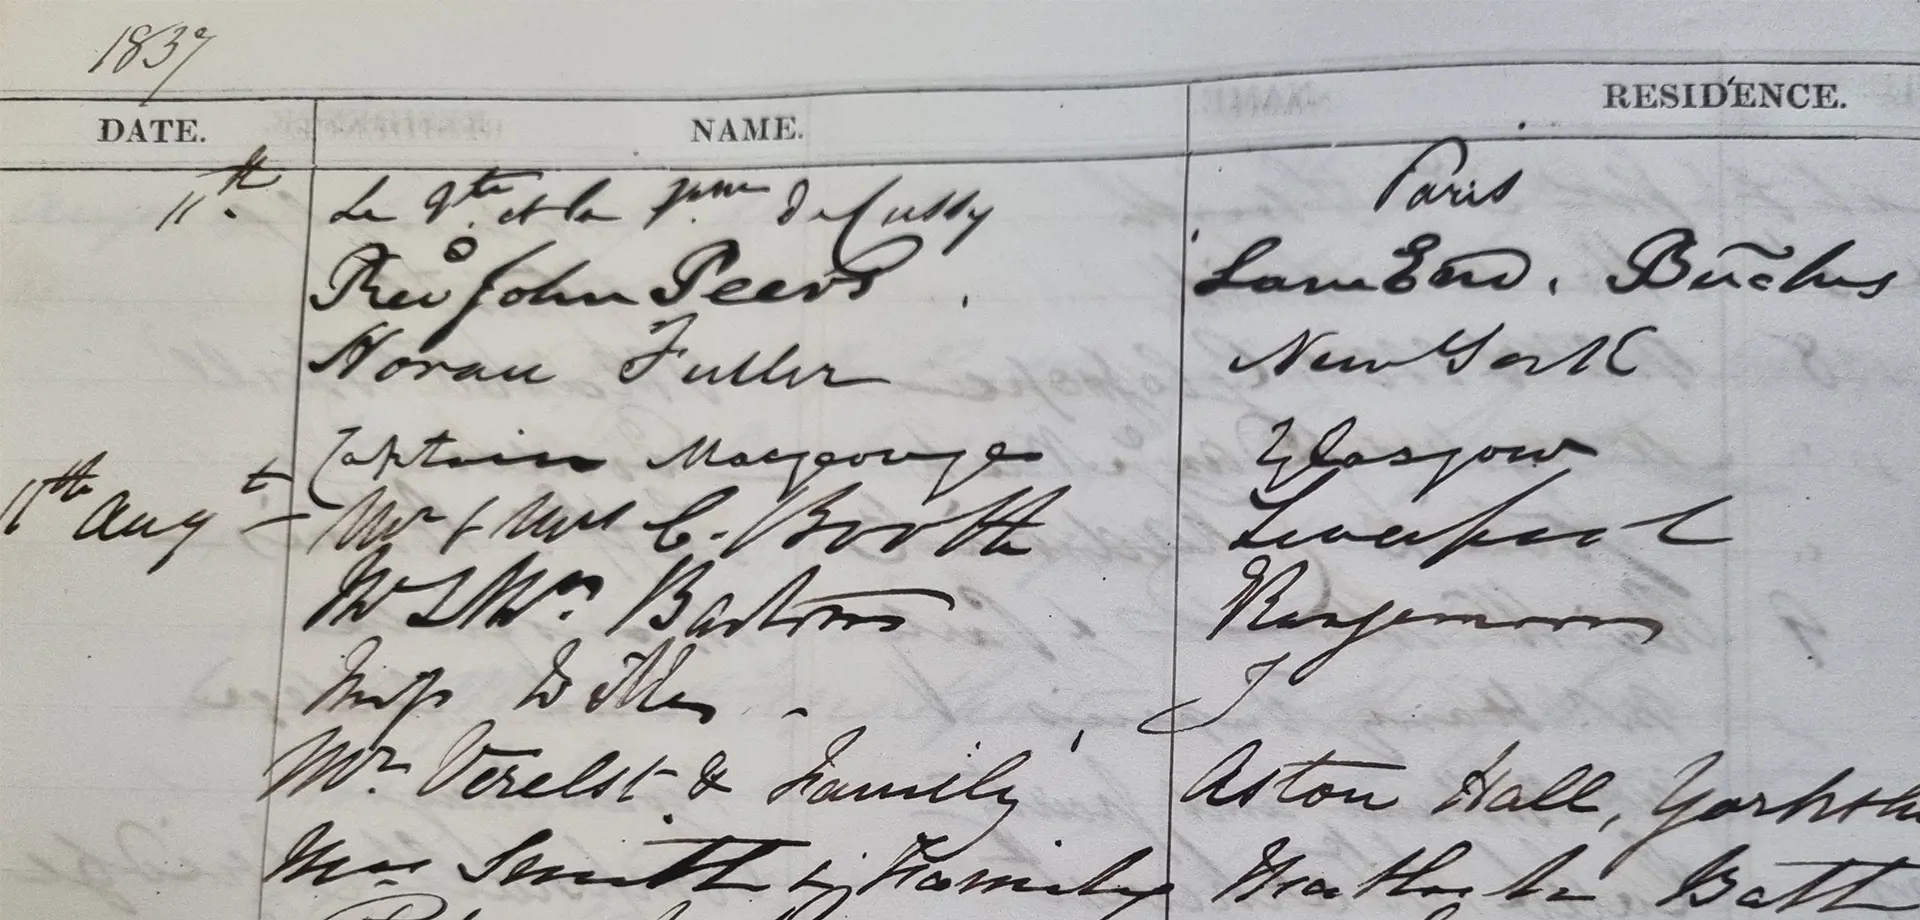 An extract from the visitors’ book which includes the entry for Mr Verelst and family of Aston Hall. 